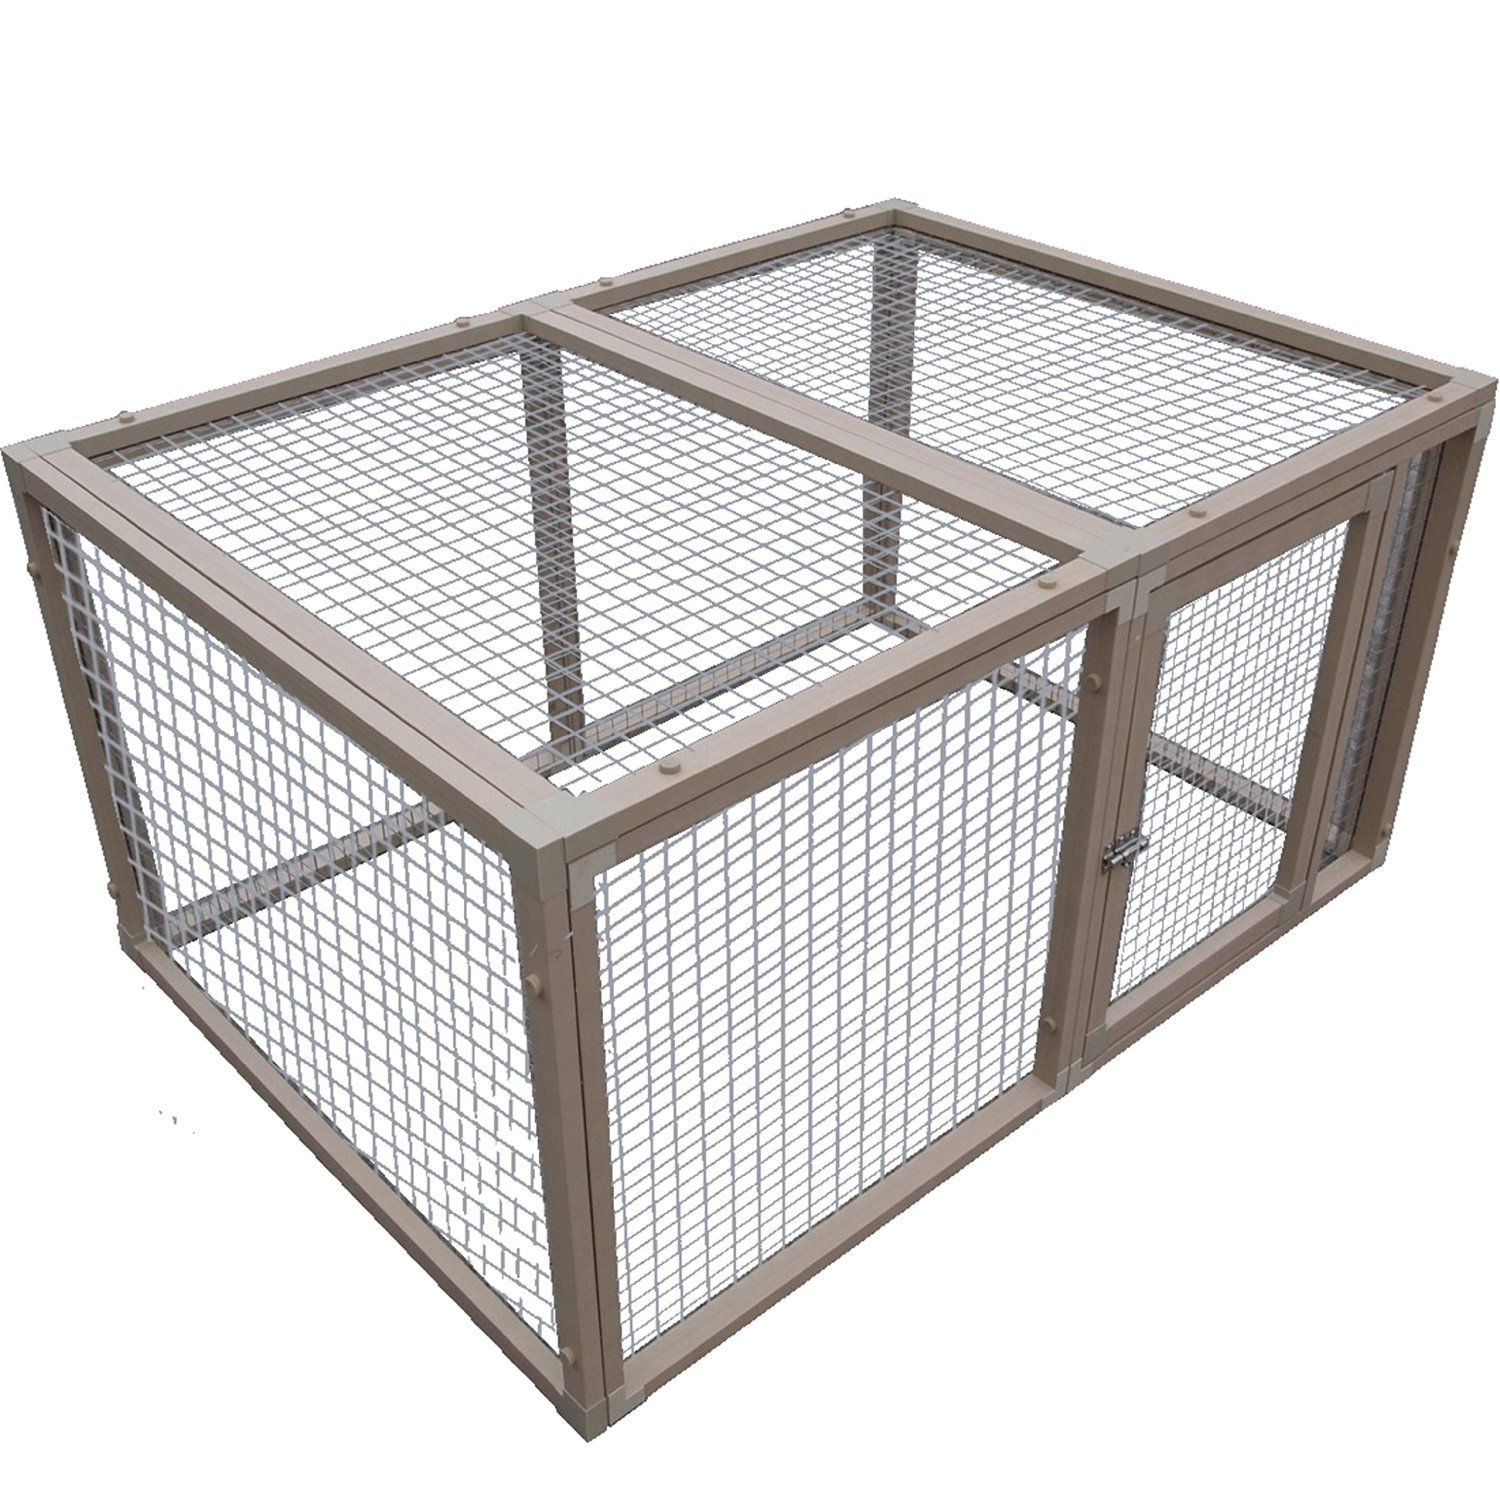 Chicken Coop Cage House Building Poultry Supply Fence Pen ...